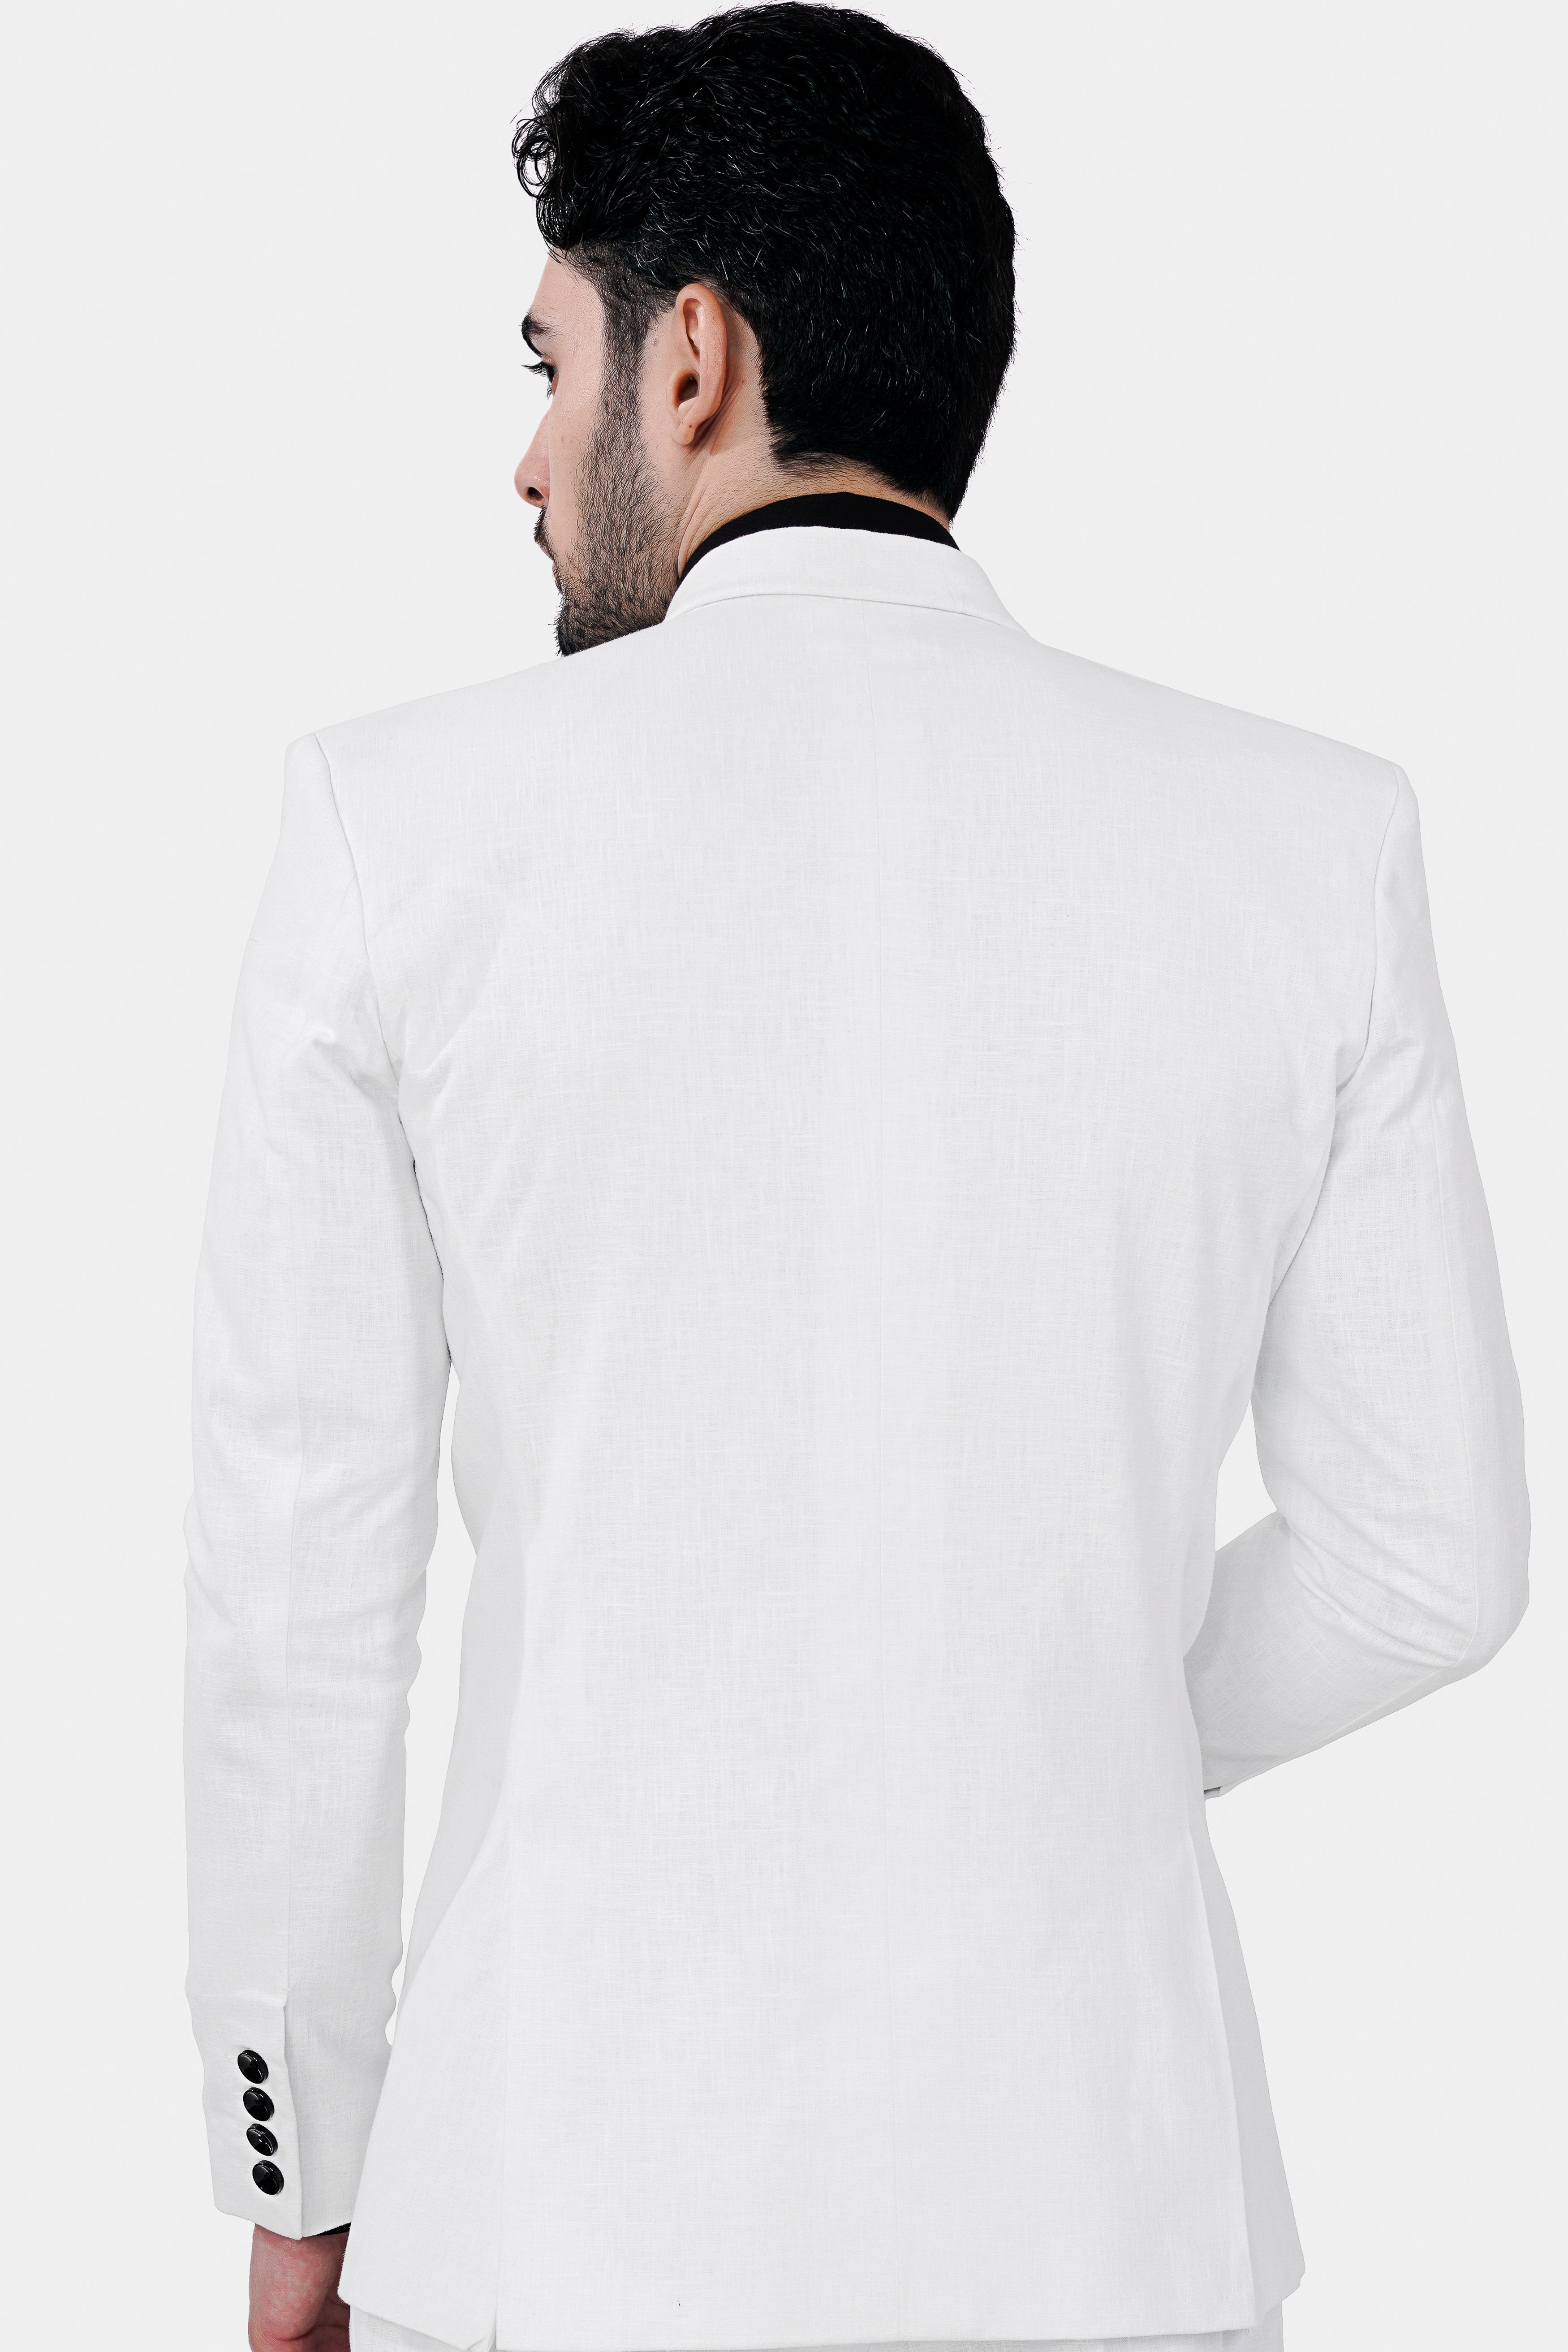 Bright White Luxurious Linen Single Breasted Blazer  ,BL3042-SB-PP-36, BL3042-SB-PP-38, BL3042-SB-PP-40, BL3042-SB-PP-42, BL3042-SB-PP-44, BL3042-SB-PP-46, BL3042-SB-PP-48, BL3042-SB-PP-50, BL3042-SB-PP-52, BL3042-SB-PP-54, BL3042-SB-PP-56, BL3042-SB-PP-58, BL3042-SB-PP-60